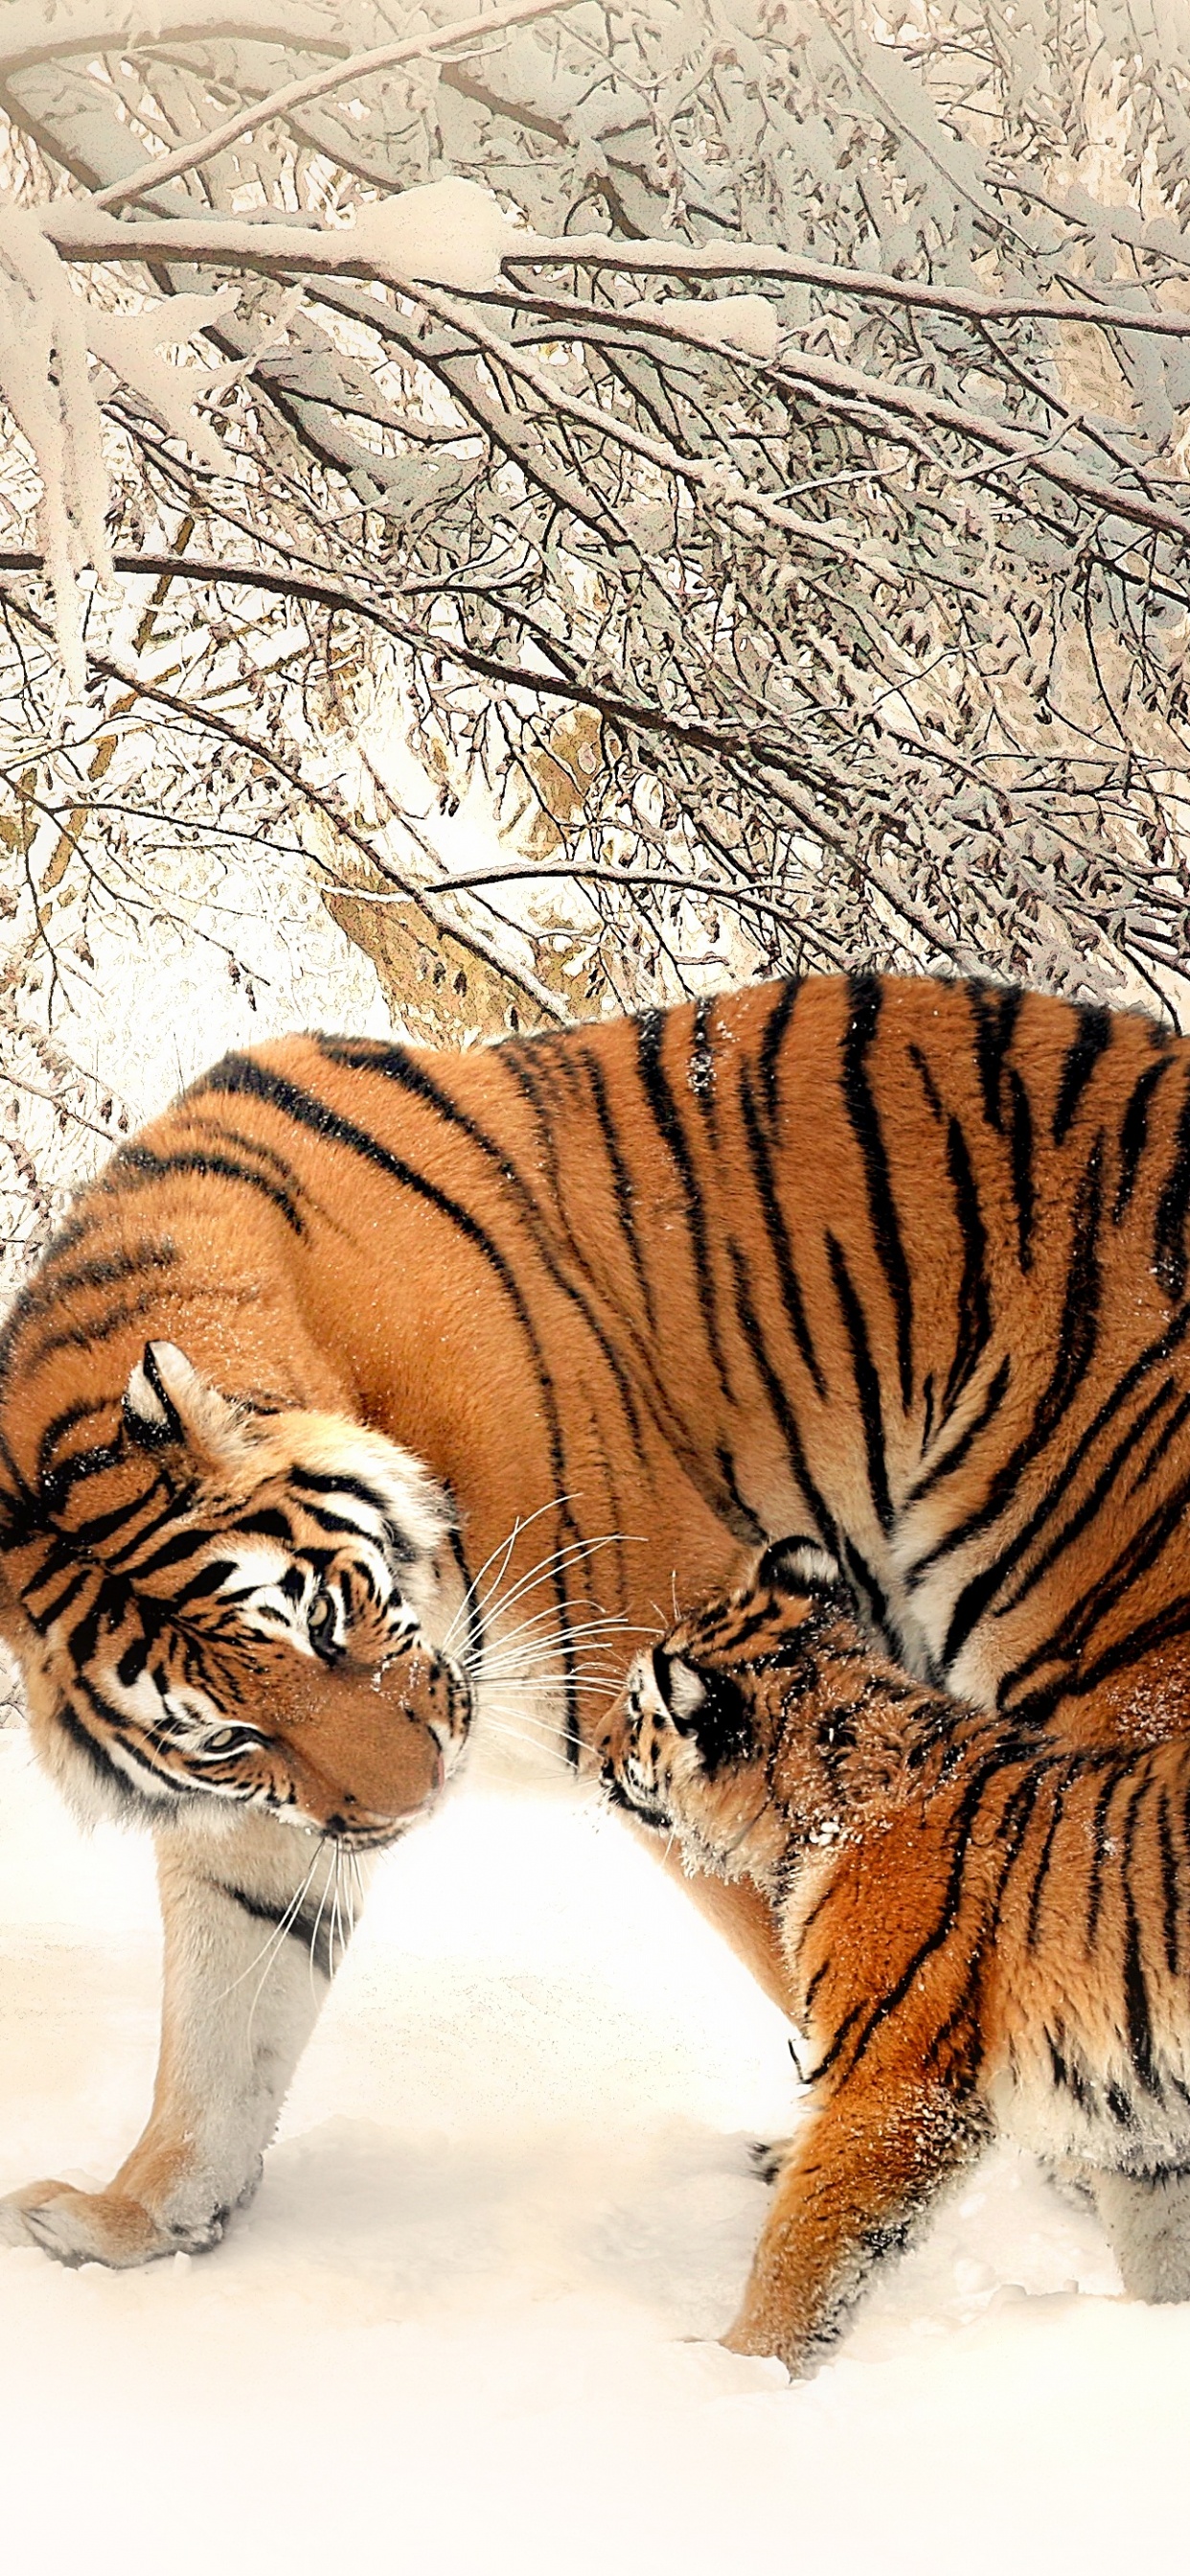 Tiger Walking on Snow Covered Ground During Daytime. Wallpaper in 1242x2688 Resolution